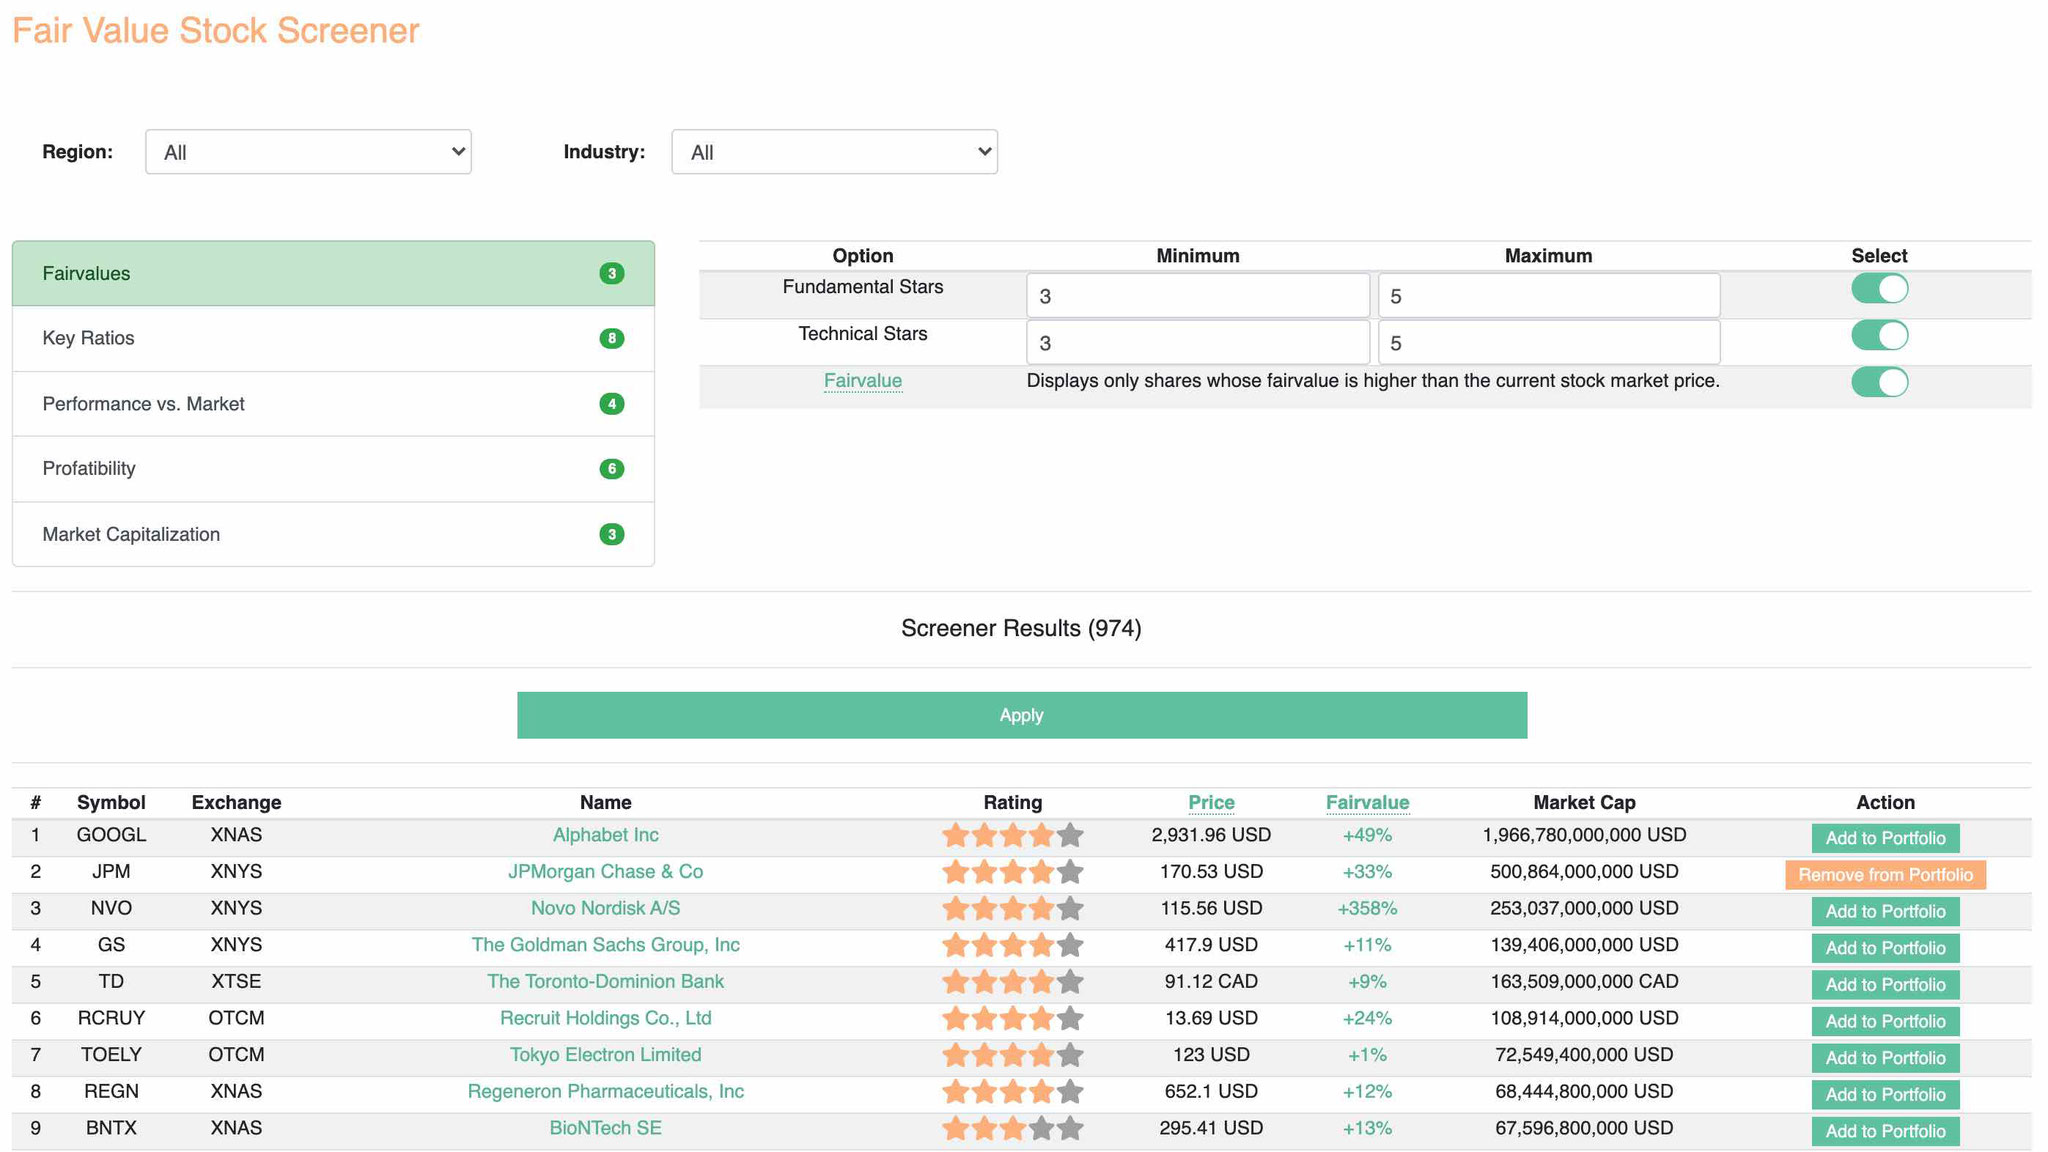 STOCK SCREENER: FILTER THE VALUE STOCK DATABASE ACCORDING TO YOUR PREFERENCES